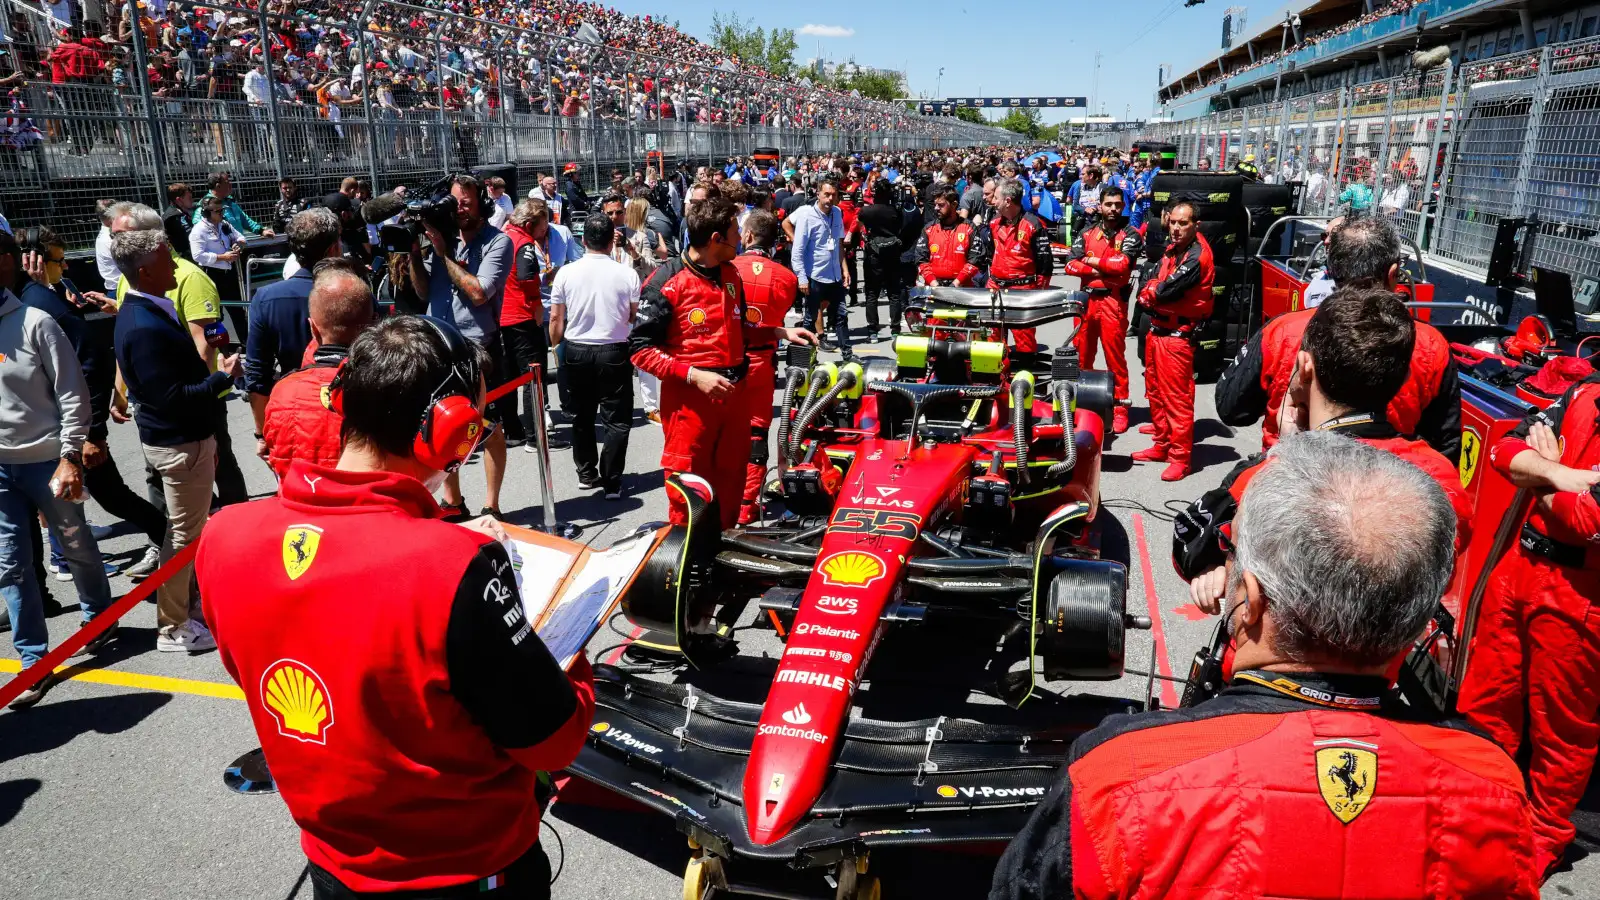 Carlos Sainz's Ferrari on the grid surrounded by mechanics waiting for the start of the race. Montreal June 2022